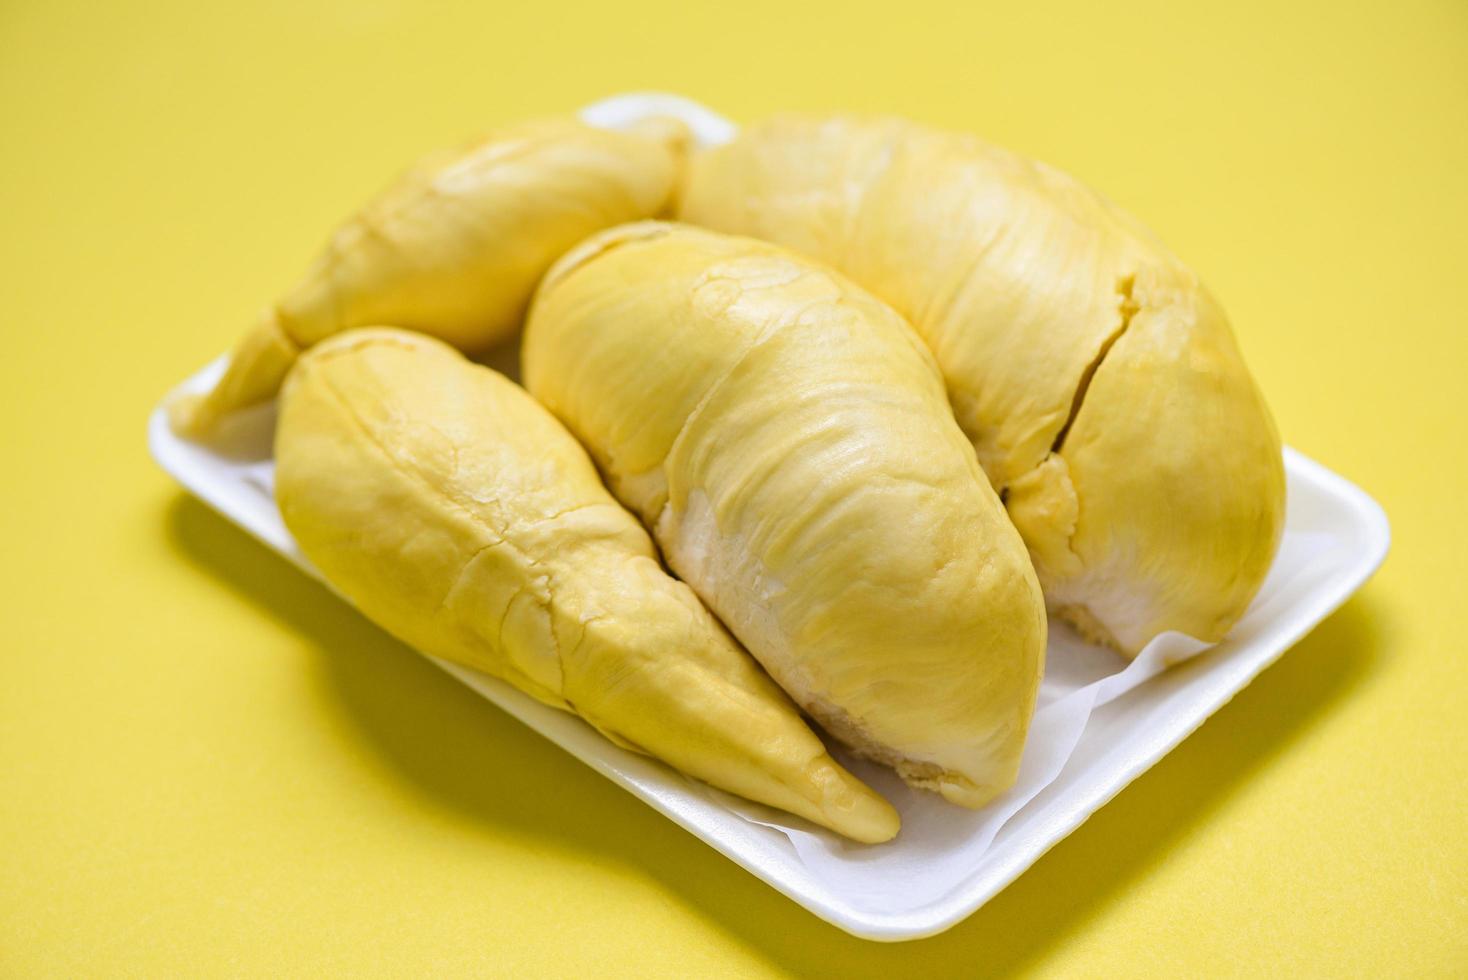 Durian fruit fresh from tree peel on Plastic tray and yellow background - Ripe durian tropical fruit summer for sweet dessert or snack in Thailand photo